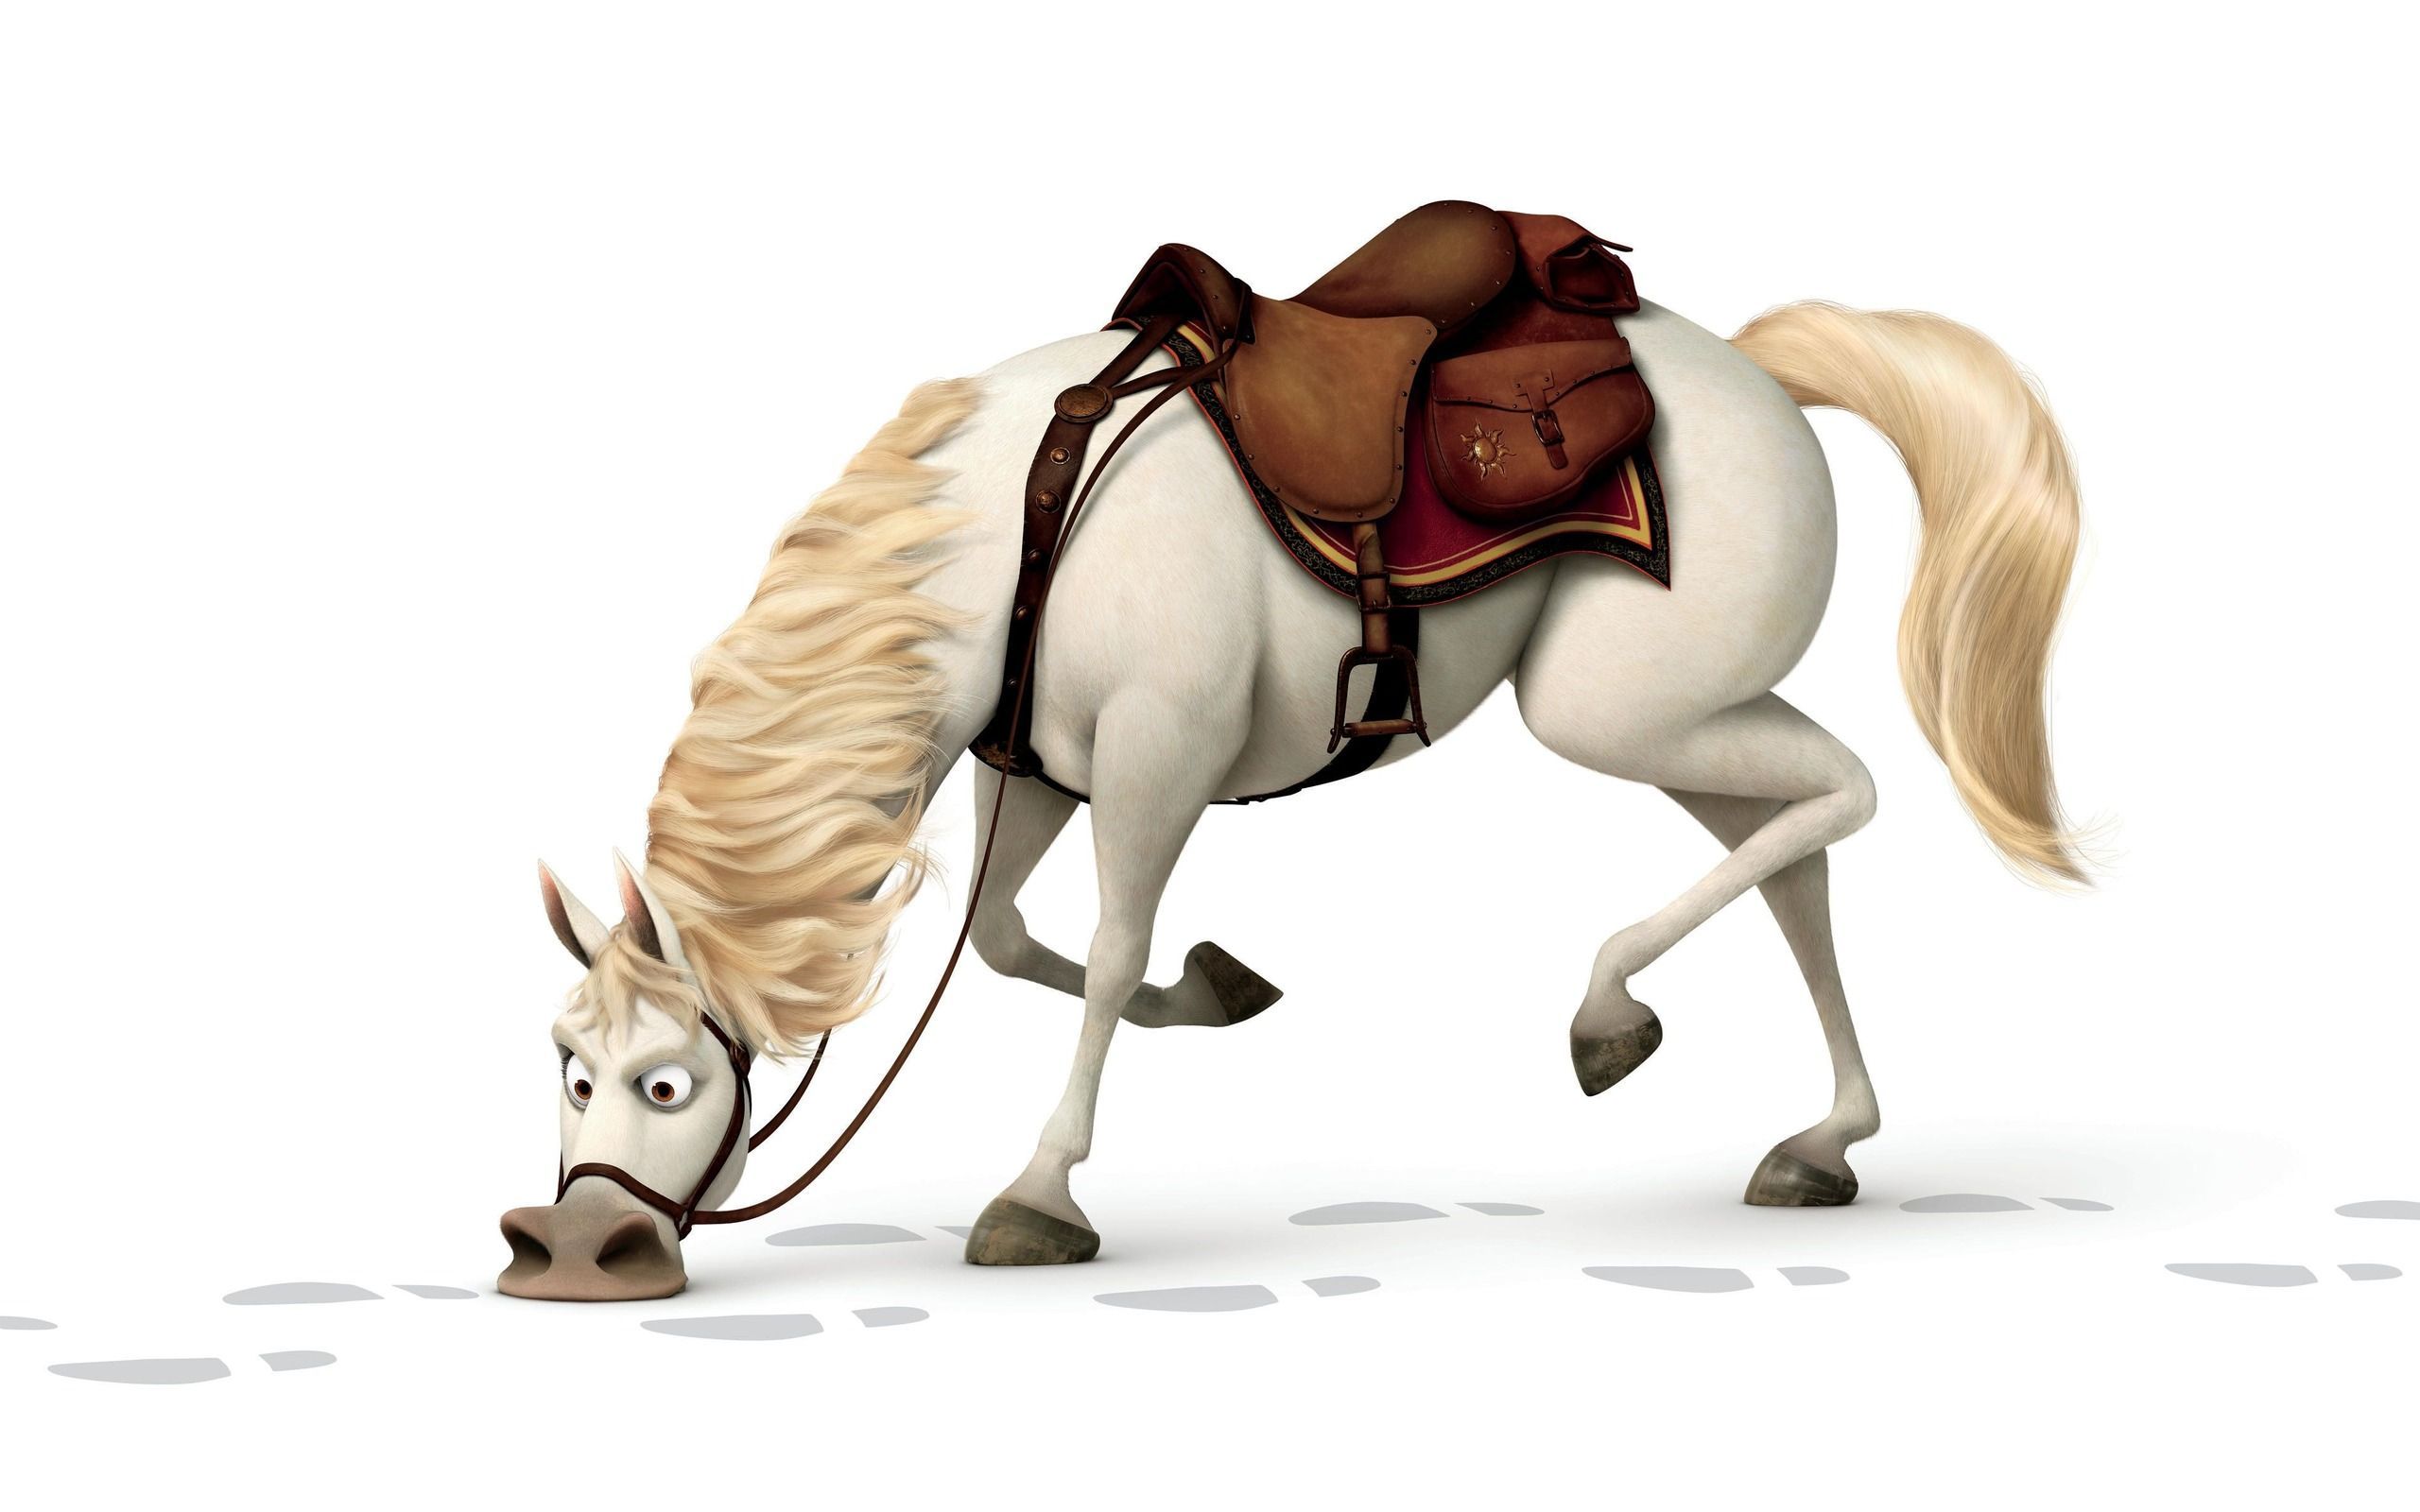 Tangled, horse wallpaper. Cartoons HD Wallpaper and background